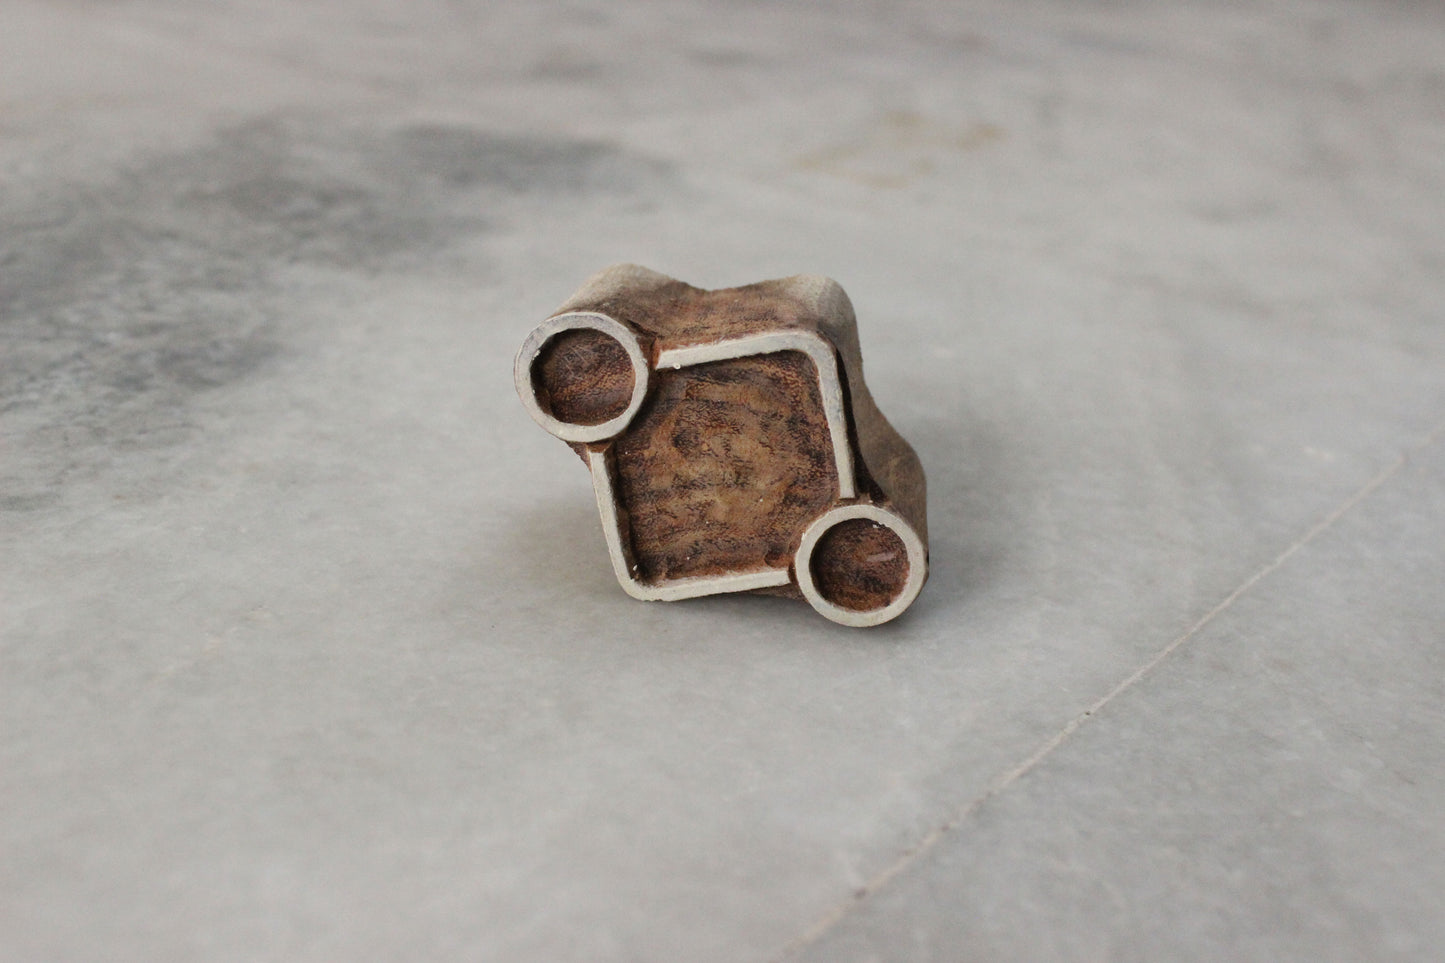 Puzzle Stamp Hand Carved Wood Block Stamp Game Block Print Stamp Carve Textile Block For Printing Space Soap Making Stamp Connection Textile Block